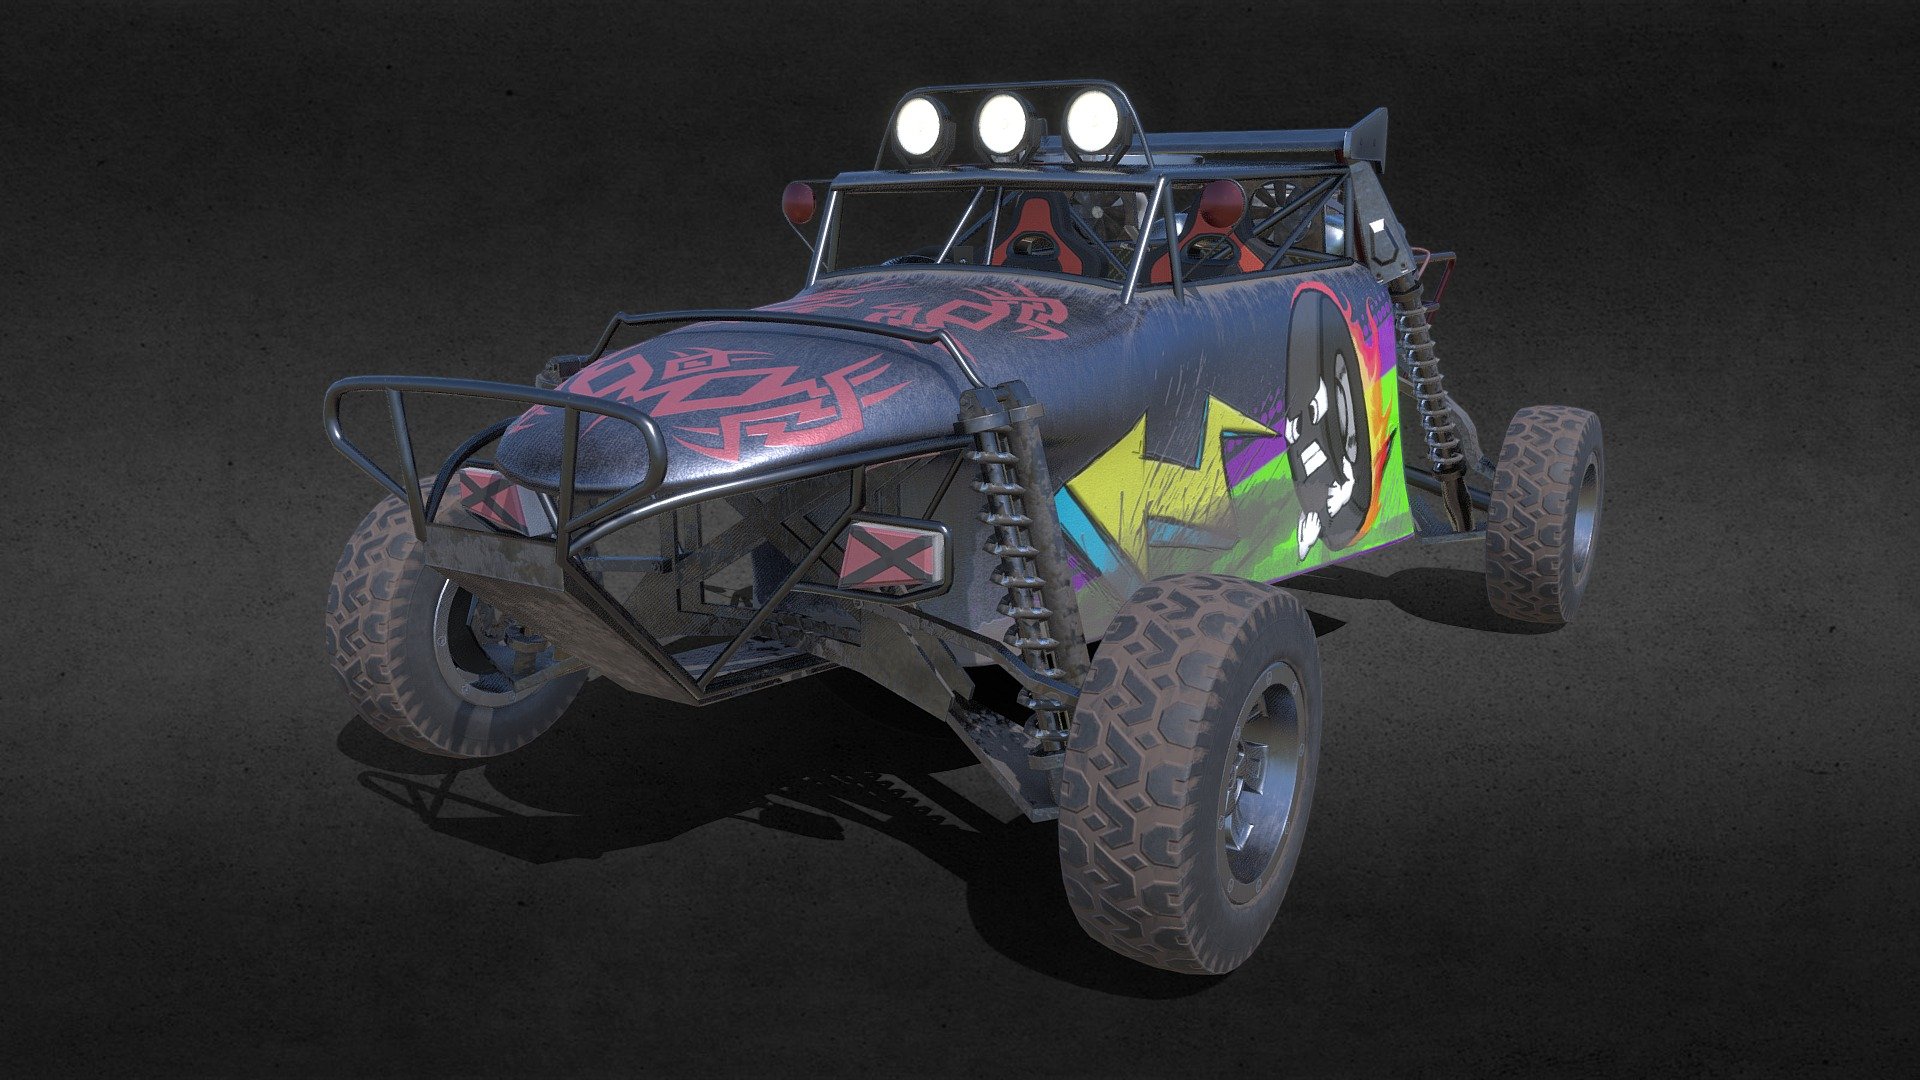 An off-road vehicle inspired by the Carson Dust Storm featured in Burnout Paradise.

The primary focus of this model was to learn how to use PBR materials through Substance Painter.

Feel free to leave any criticism you may have, there are bound to be many I'm sure 3d model